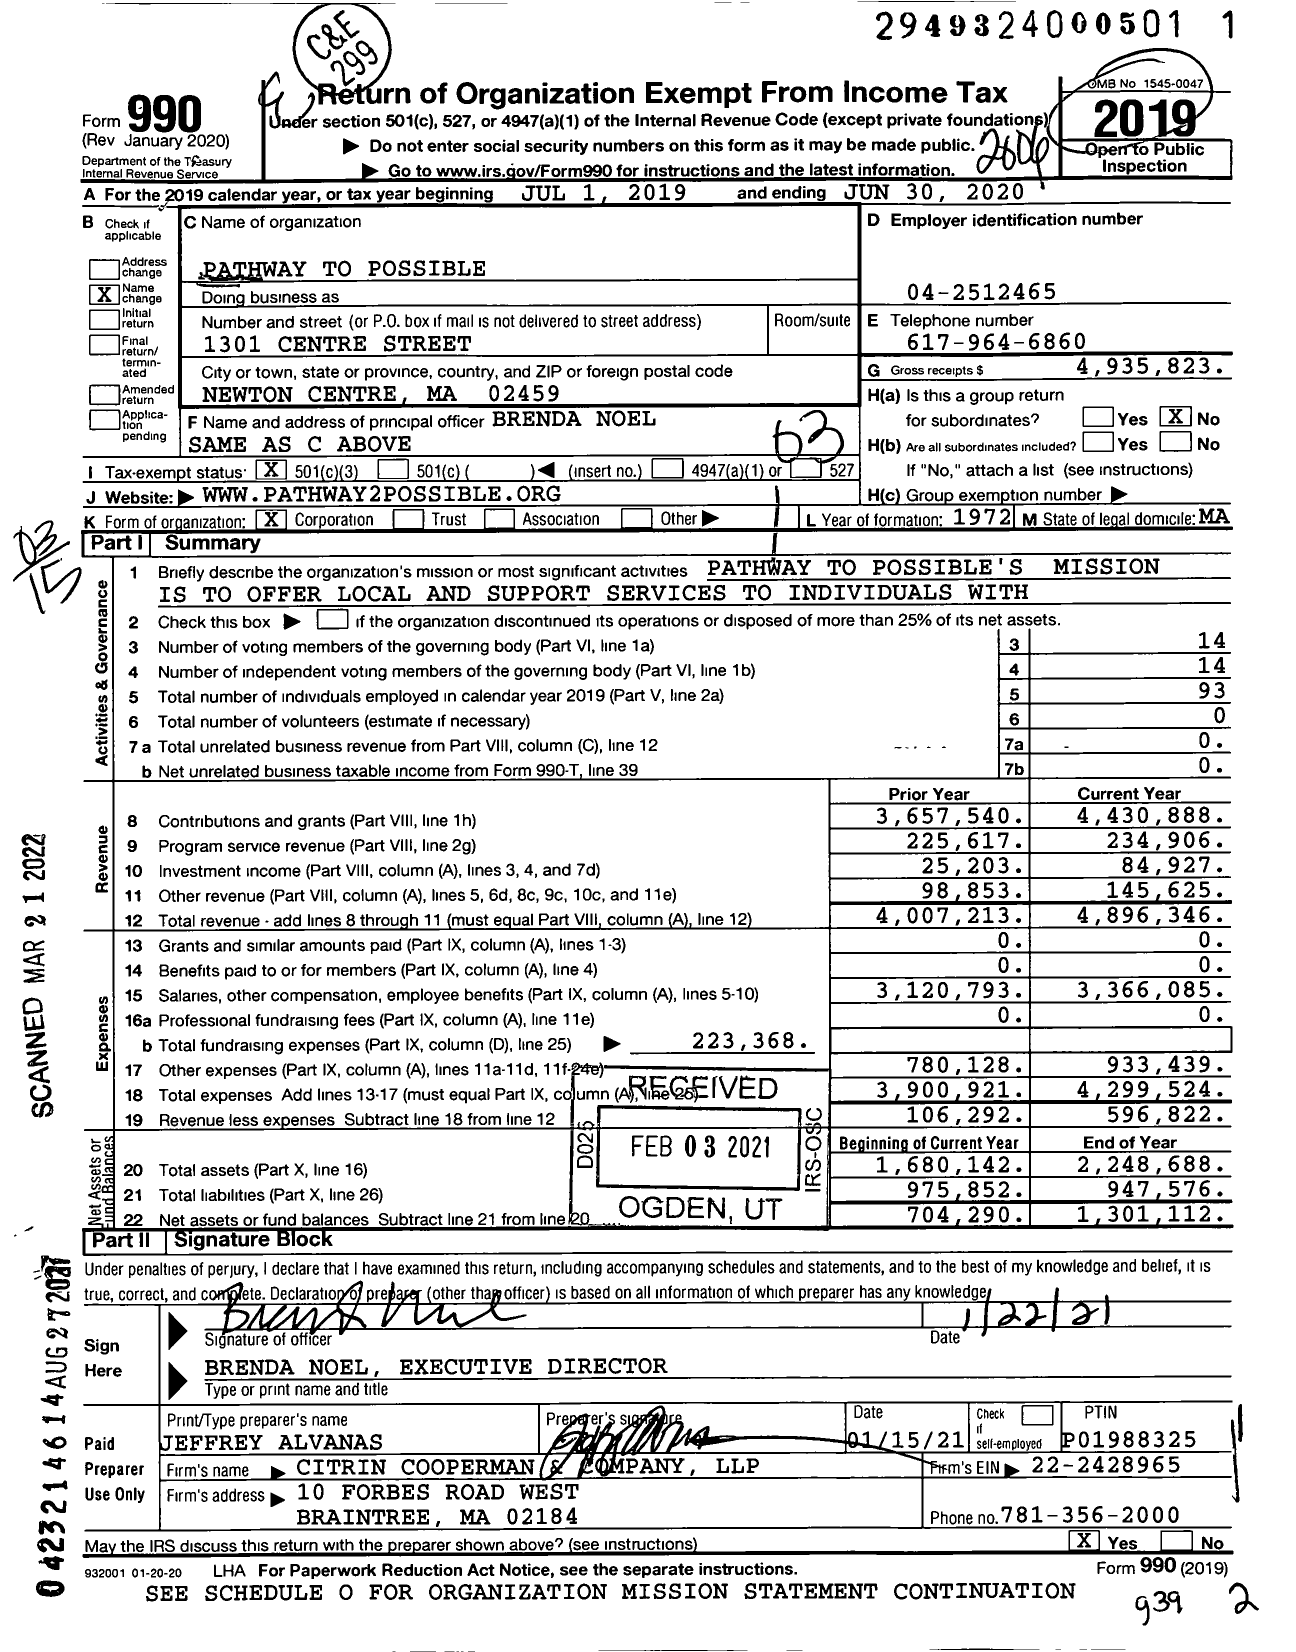 Image of first page of 2019 Form 990 for Pathway To Possible (NWW)